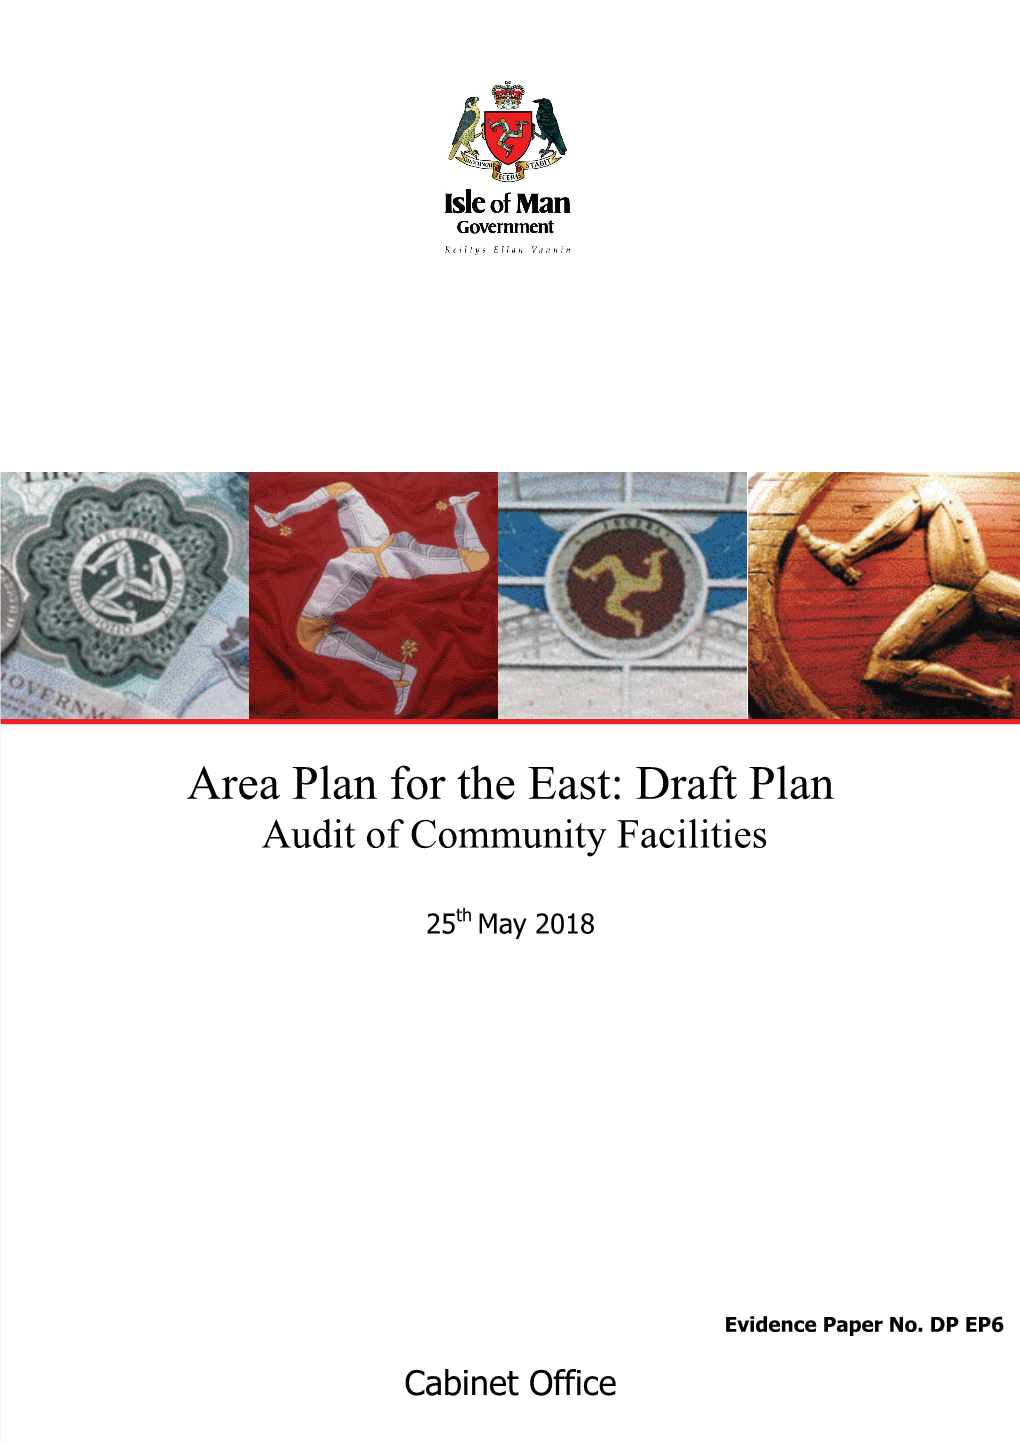 Area Plan for the East: Draft Plan Audit of Community Facilities